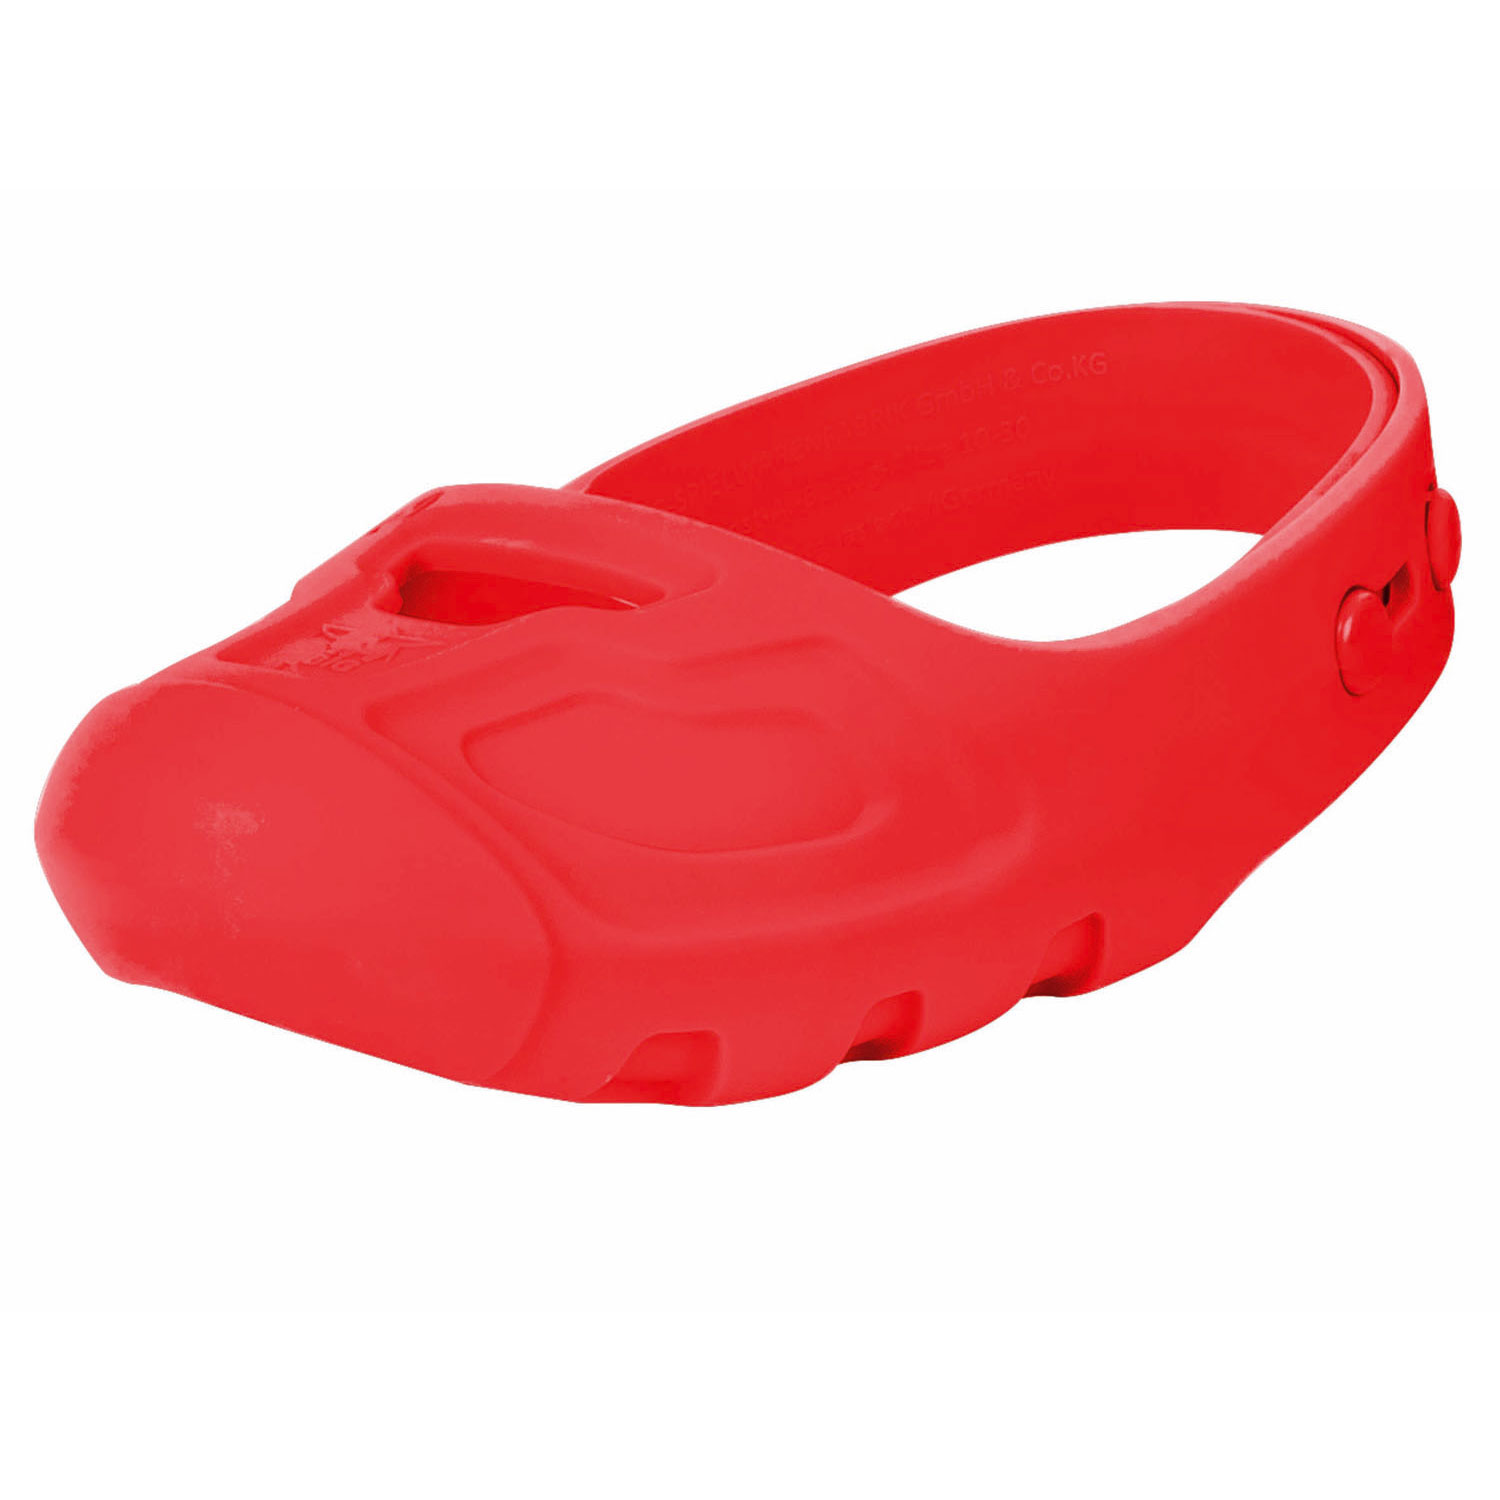 BIG Protège-chaussures Rouge, Taille 21-27